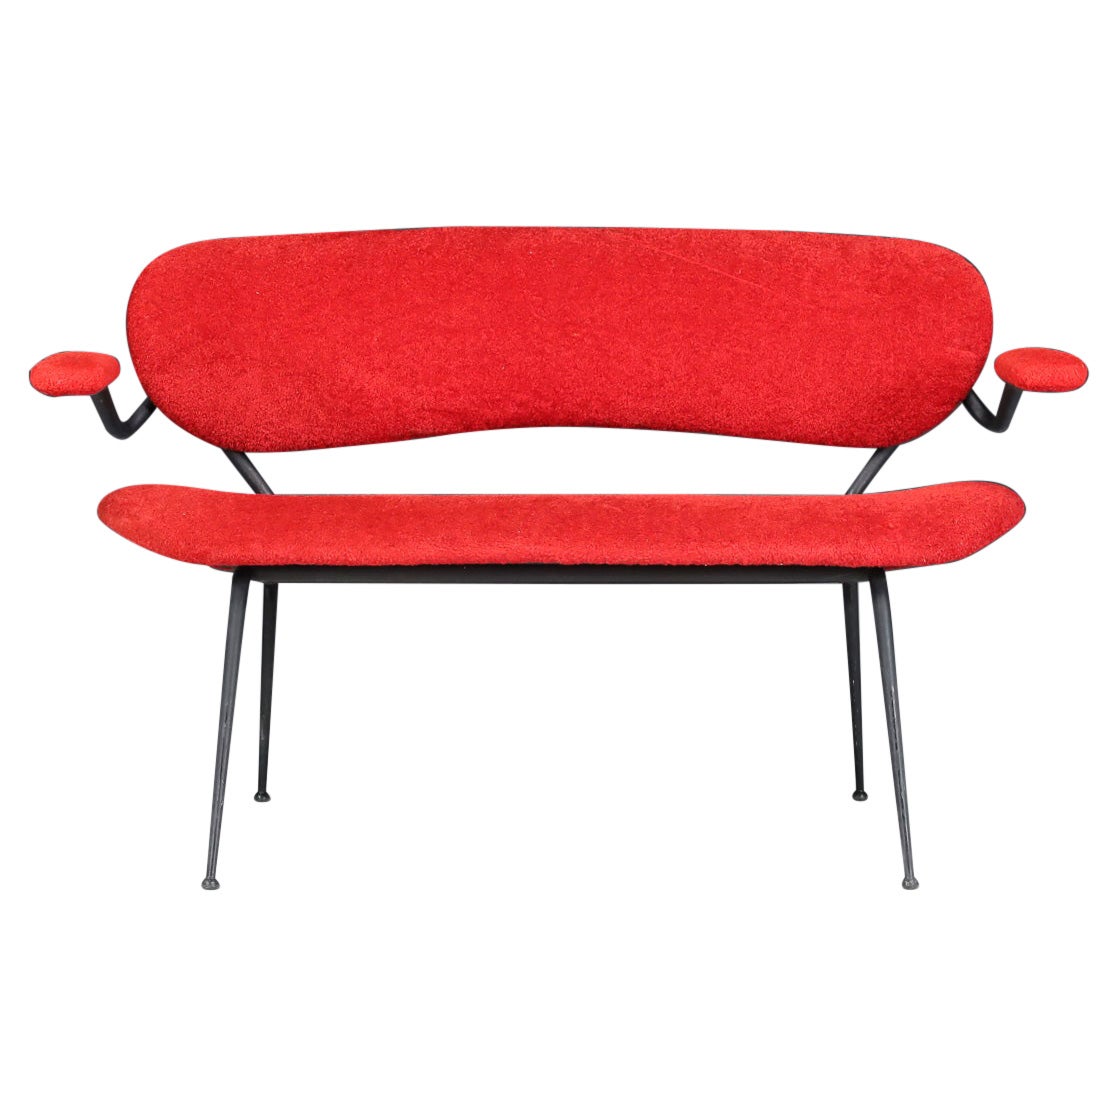 Red Mid-Century Modern Sofa/Bench by Gastone Rinaldi, Italy, 1960s For Sale